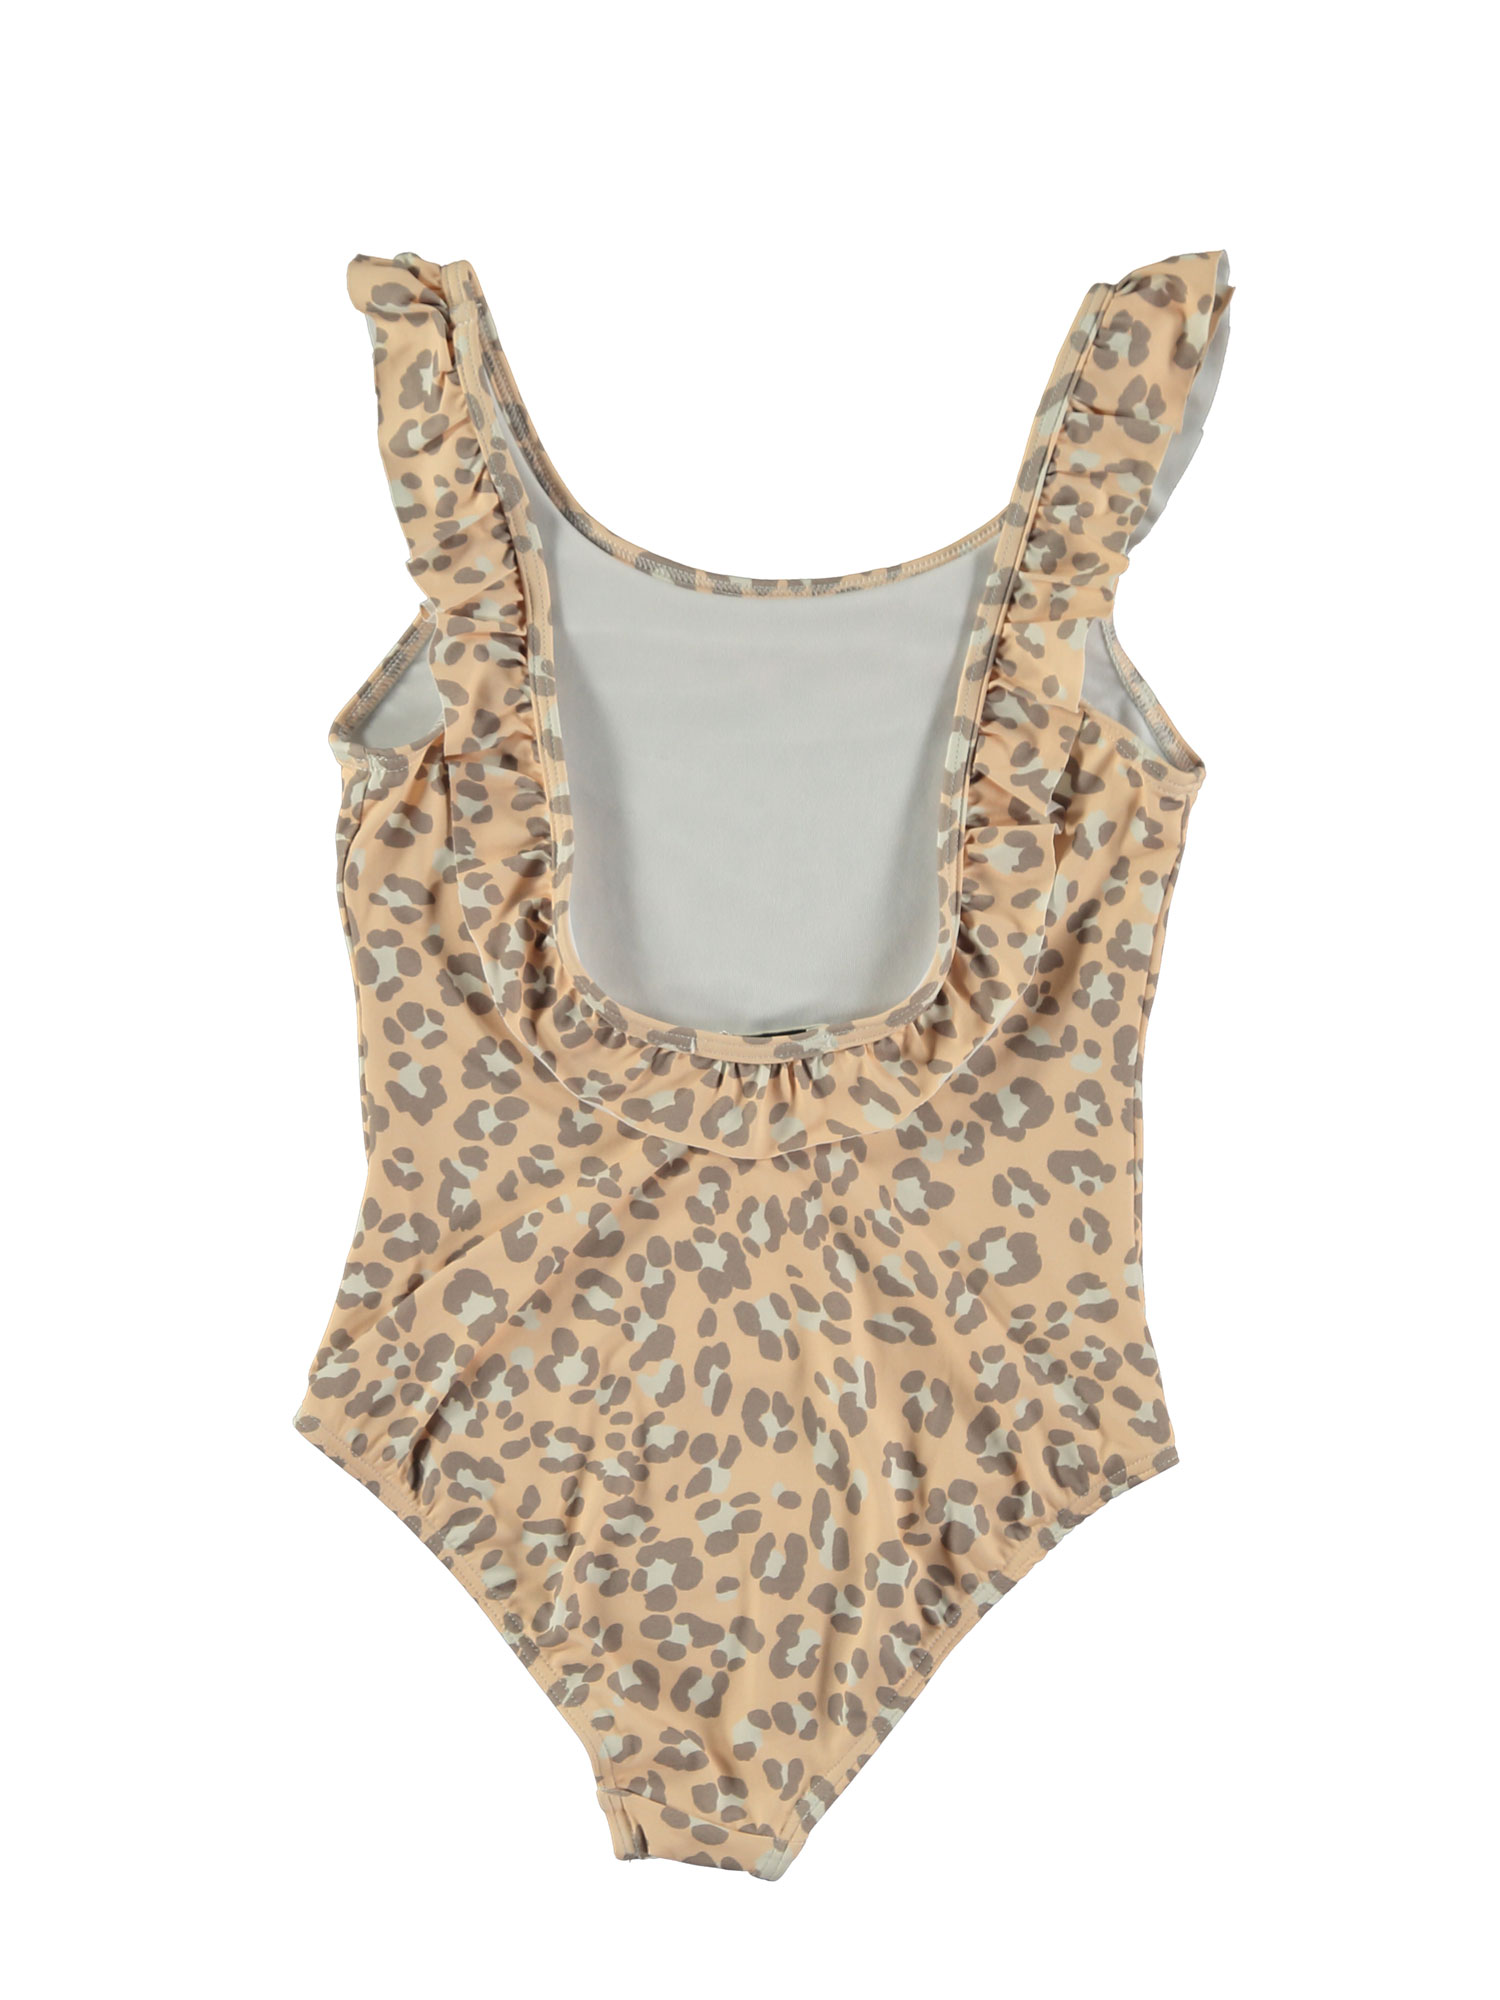 ANIMAL PRINT SWIMSUIT WITH RUFFLED STRAPS 3